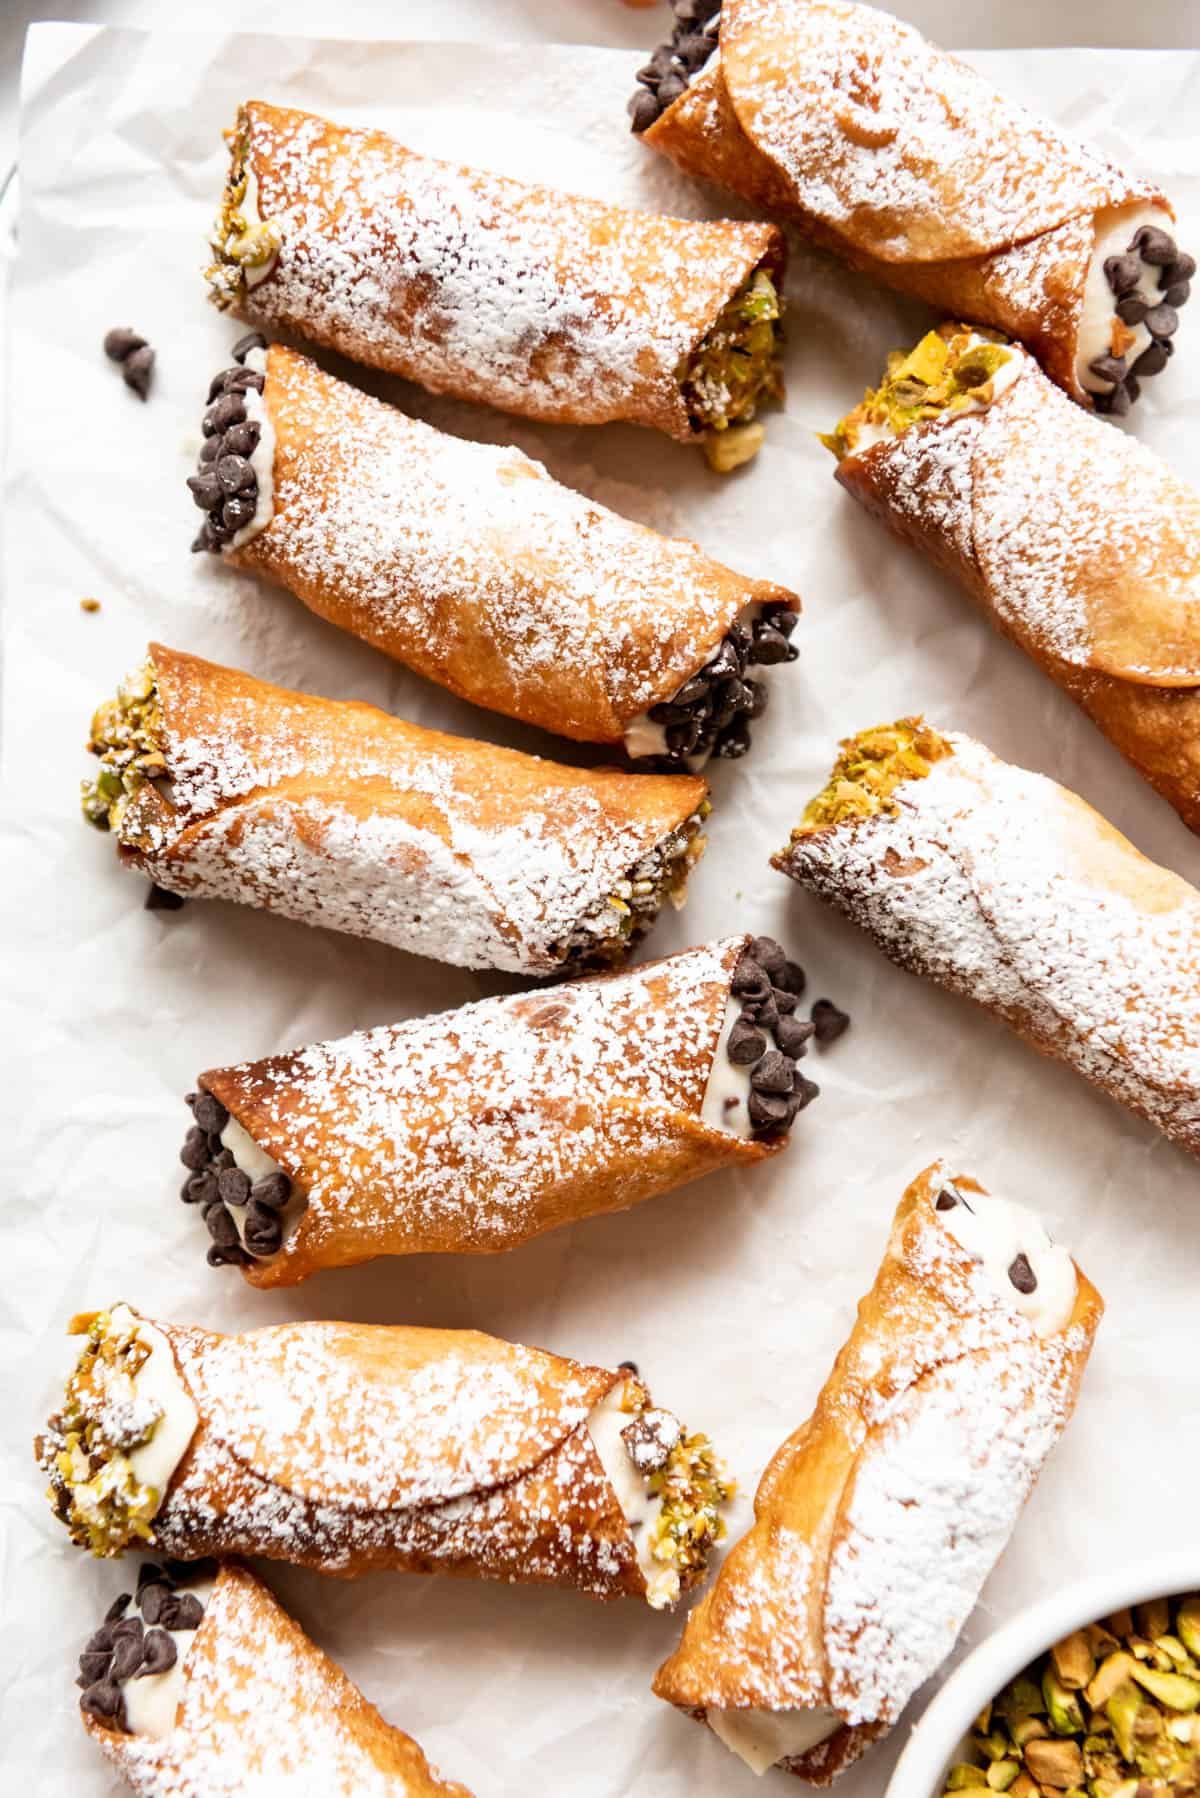 Cannoli dusted with powdered sugar and finished with chopped pistachios and mini chocoalte chips on the ends.